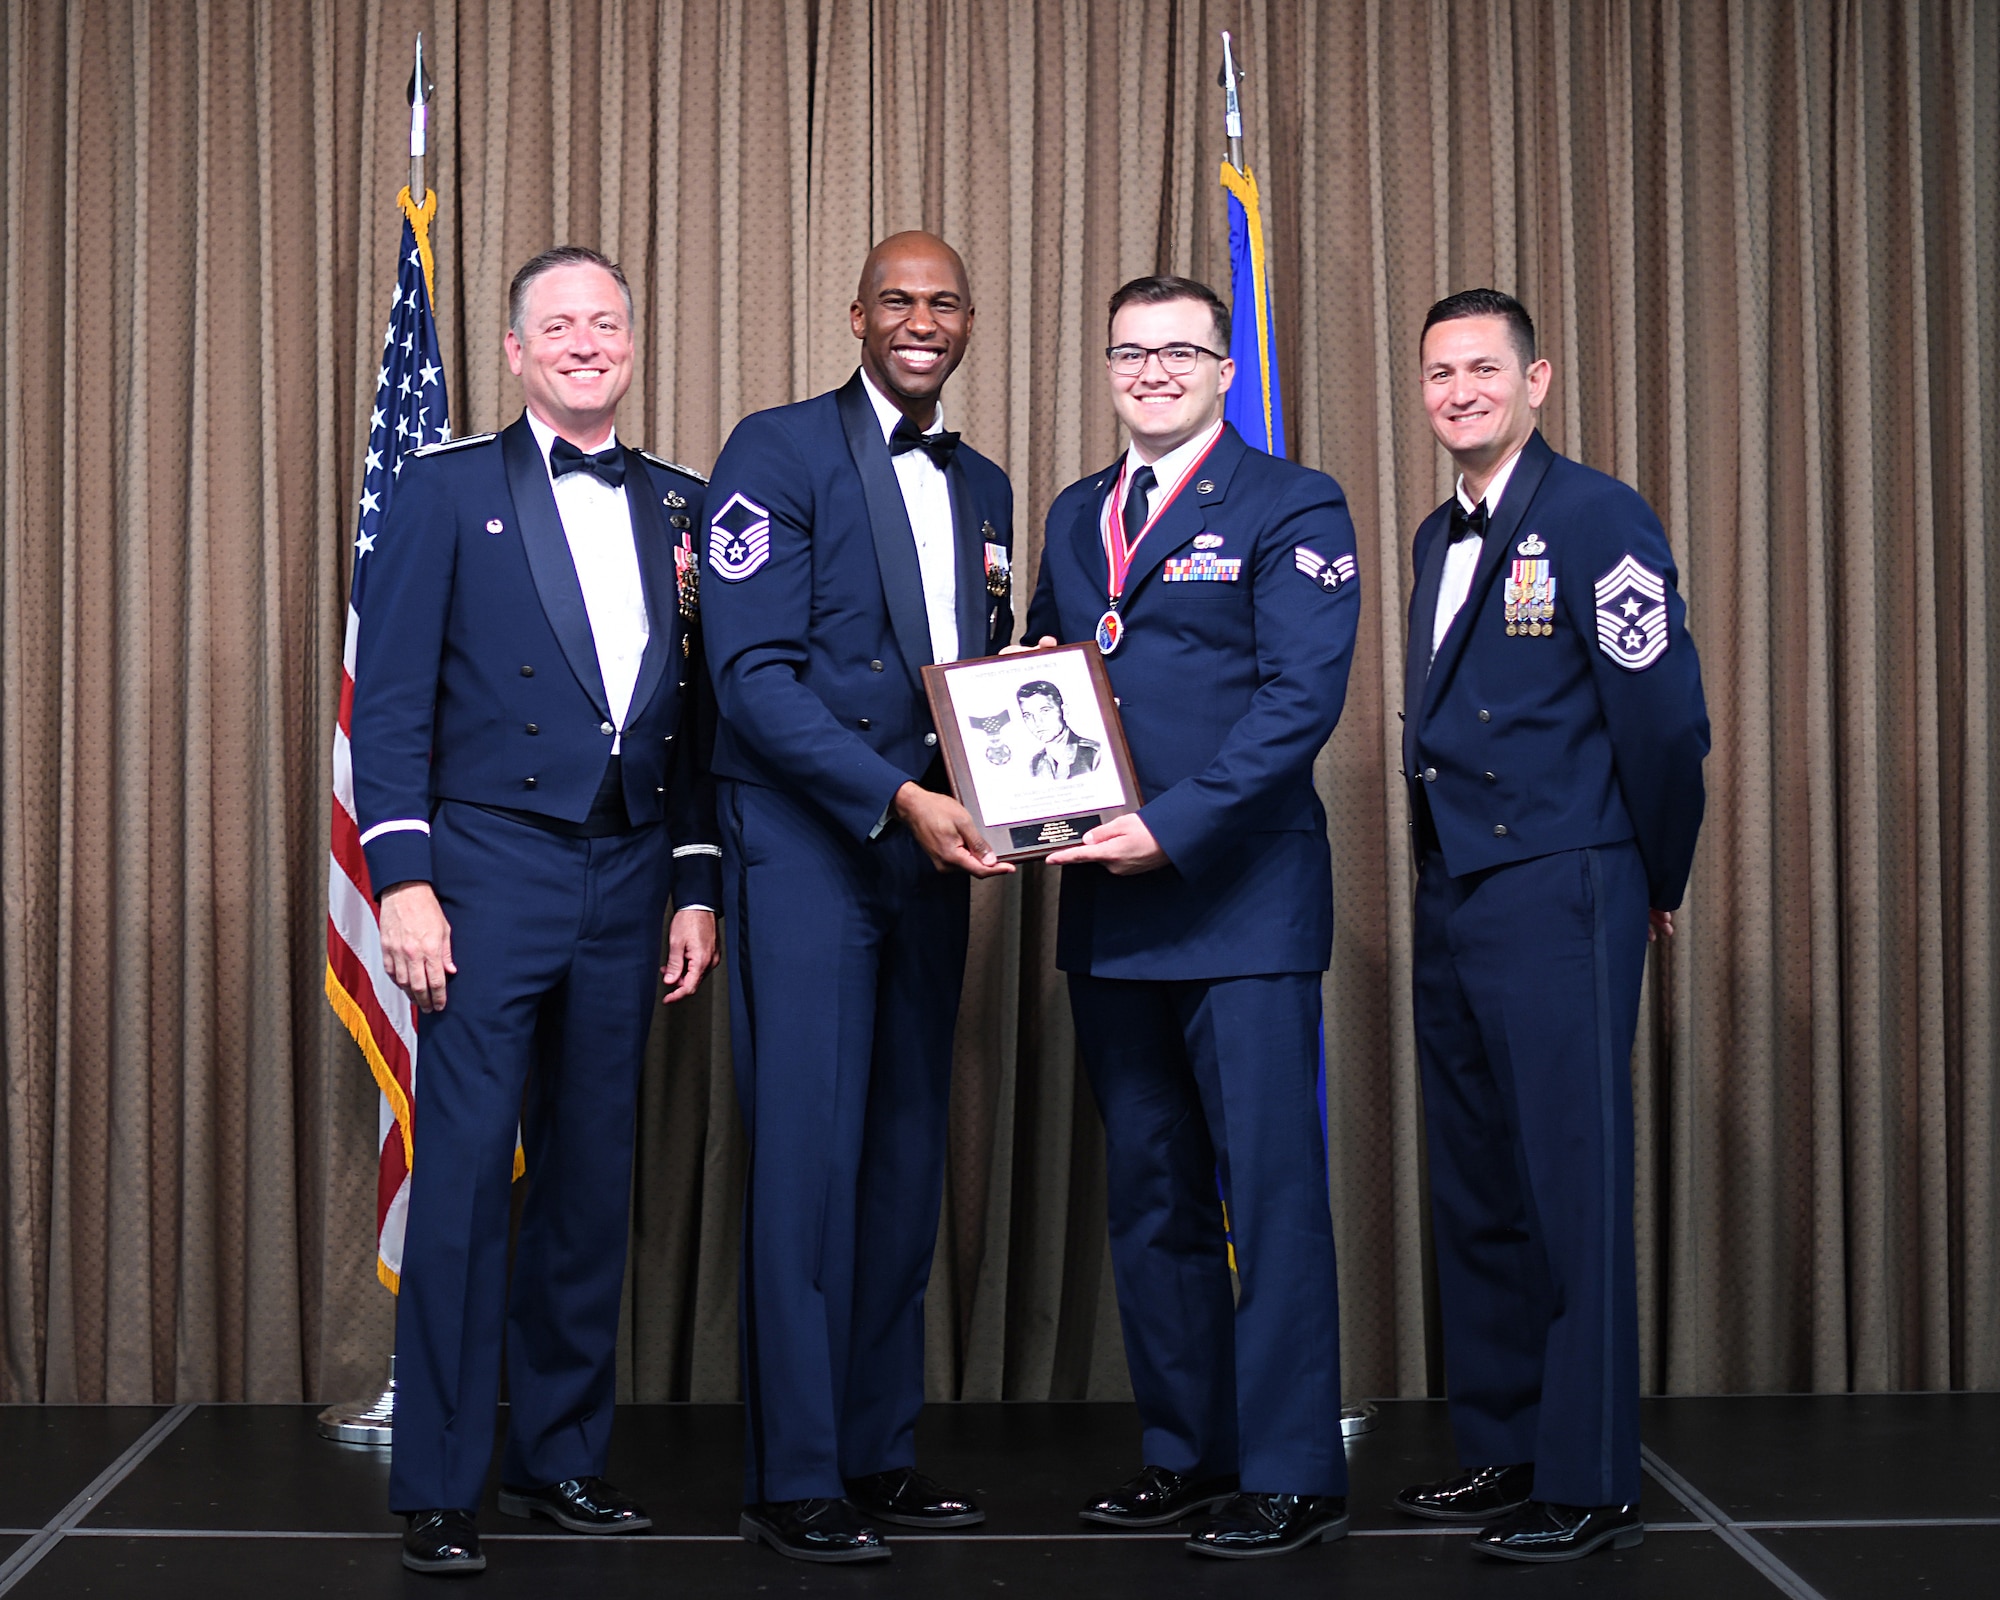 MSgt Leon Thomas, Etchberger Airman Leadership School commandant, presents Commandant's Leadership Award to SrA Lain Baker, Etchberger Airman Leadership School graduate, June 20, 2019, on Grand Forks Air Force Base, North Dakota. ALS graduation is the culmination of the first level of the Enlisted Professional Military Education continuum directed toward preparing upcoming noncommissioned officers with leadership skills for their careers. (U.S. Air Force photo by Senior Airman Elijaih Tiggs)